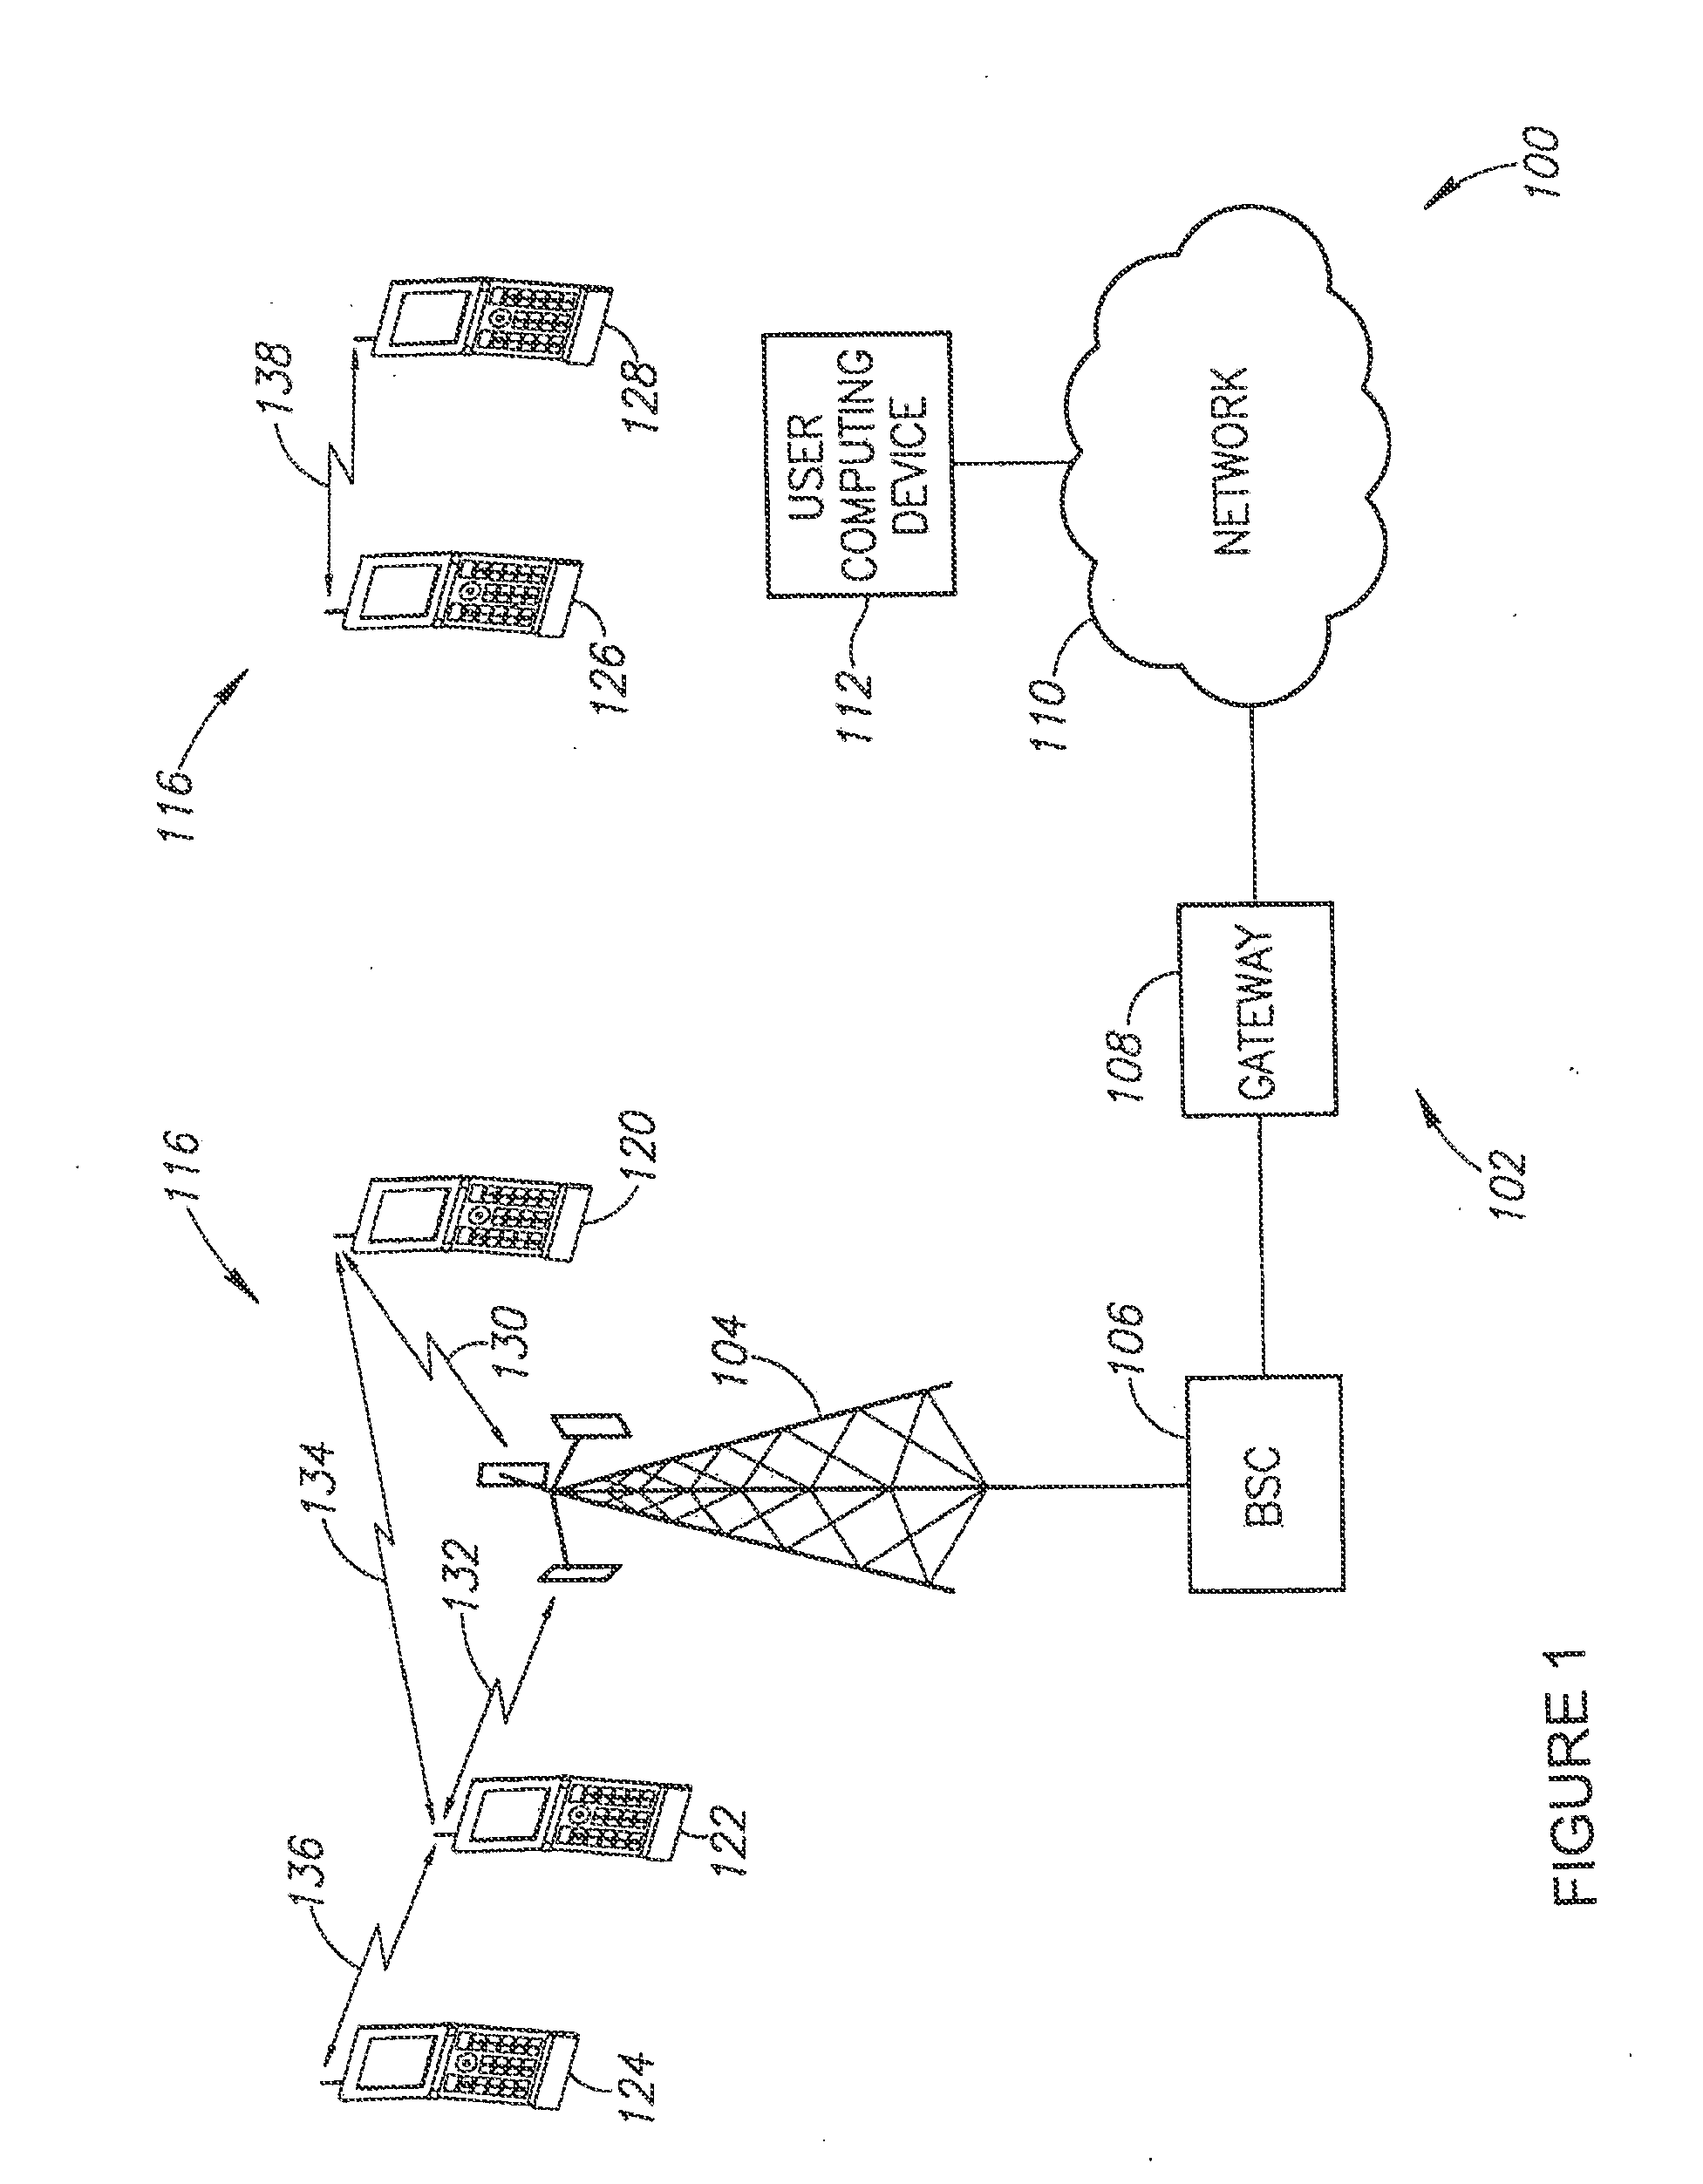 System and method for management of a dynamic network using wireless communication devices